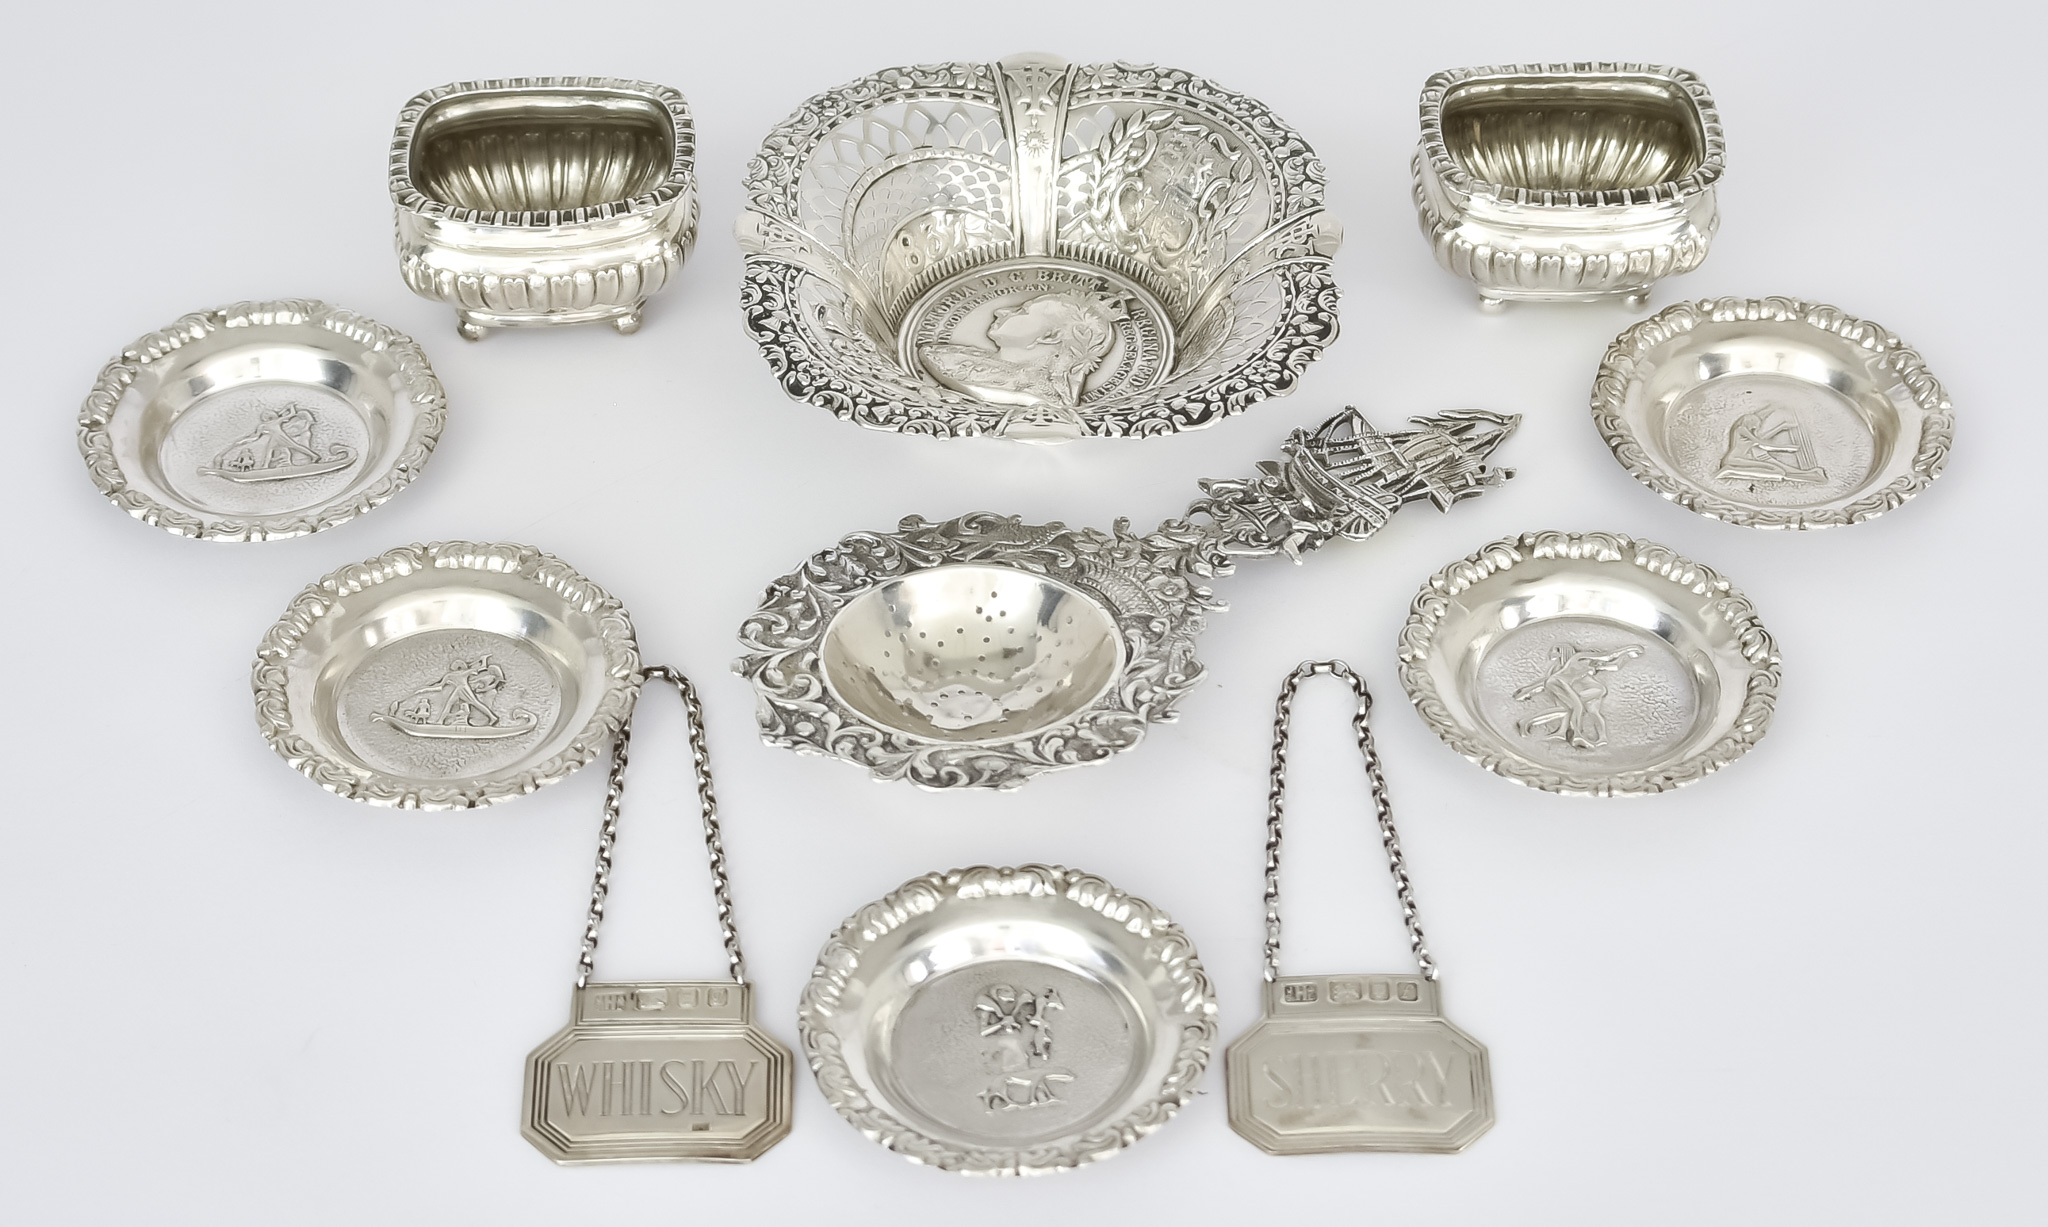 An Early 20th Century Dutch Silver Tea Strainer and Mixed Silverware, the tea strainer with import